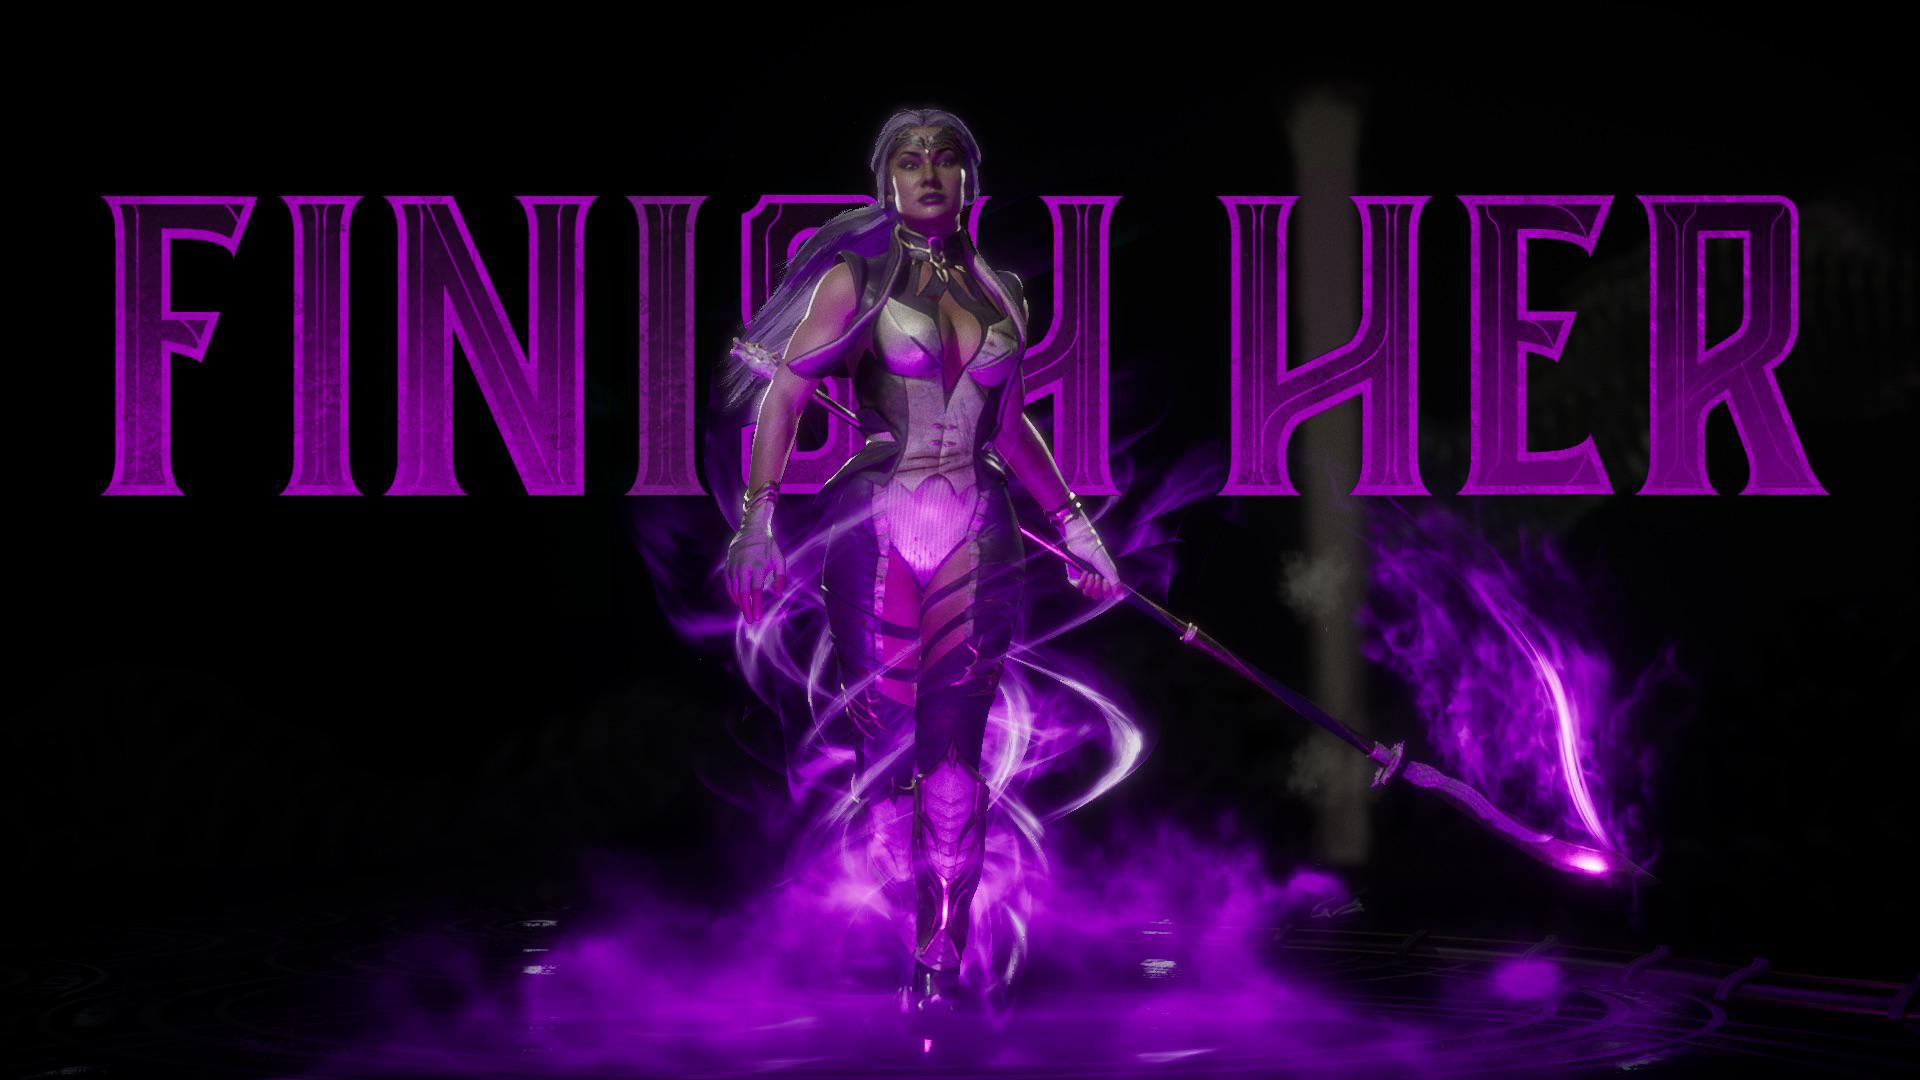 Sindel with Pink “FINISH HER” Screen